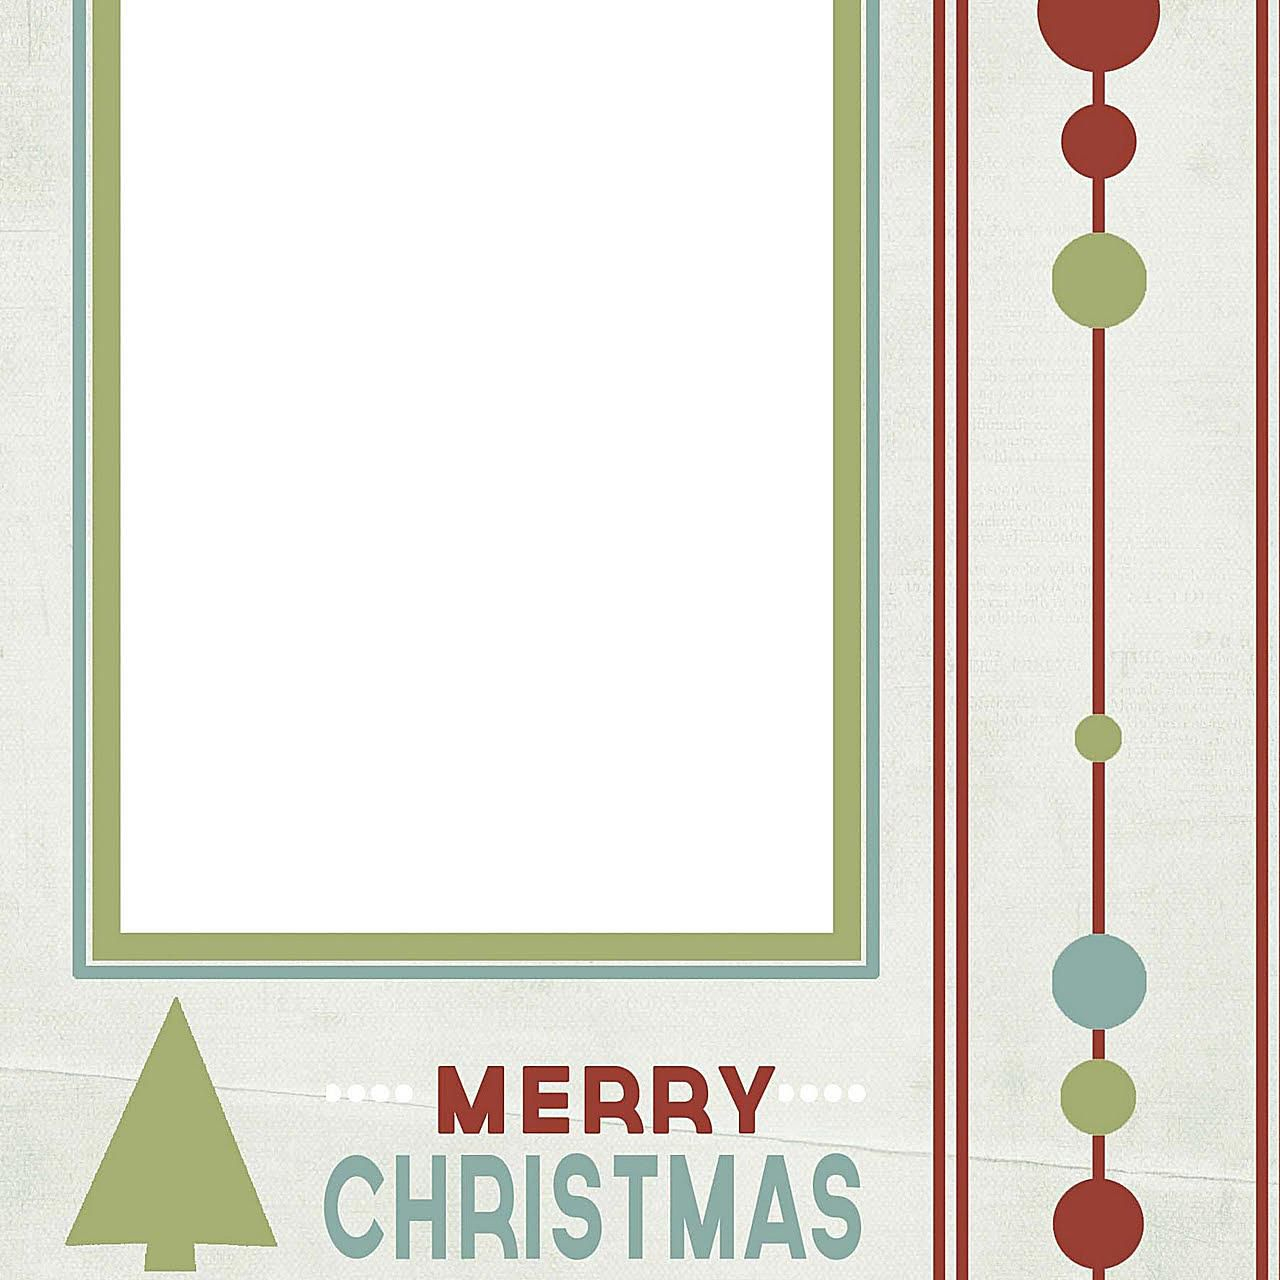 11 Free Templates For Christmas Photo Cards - Free Printable Christmas Cards With Photo Insert